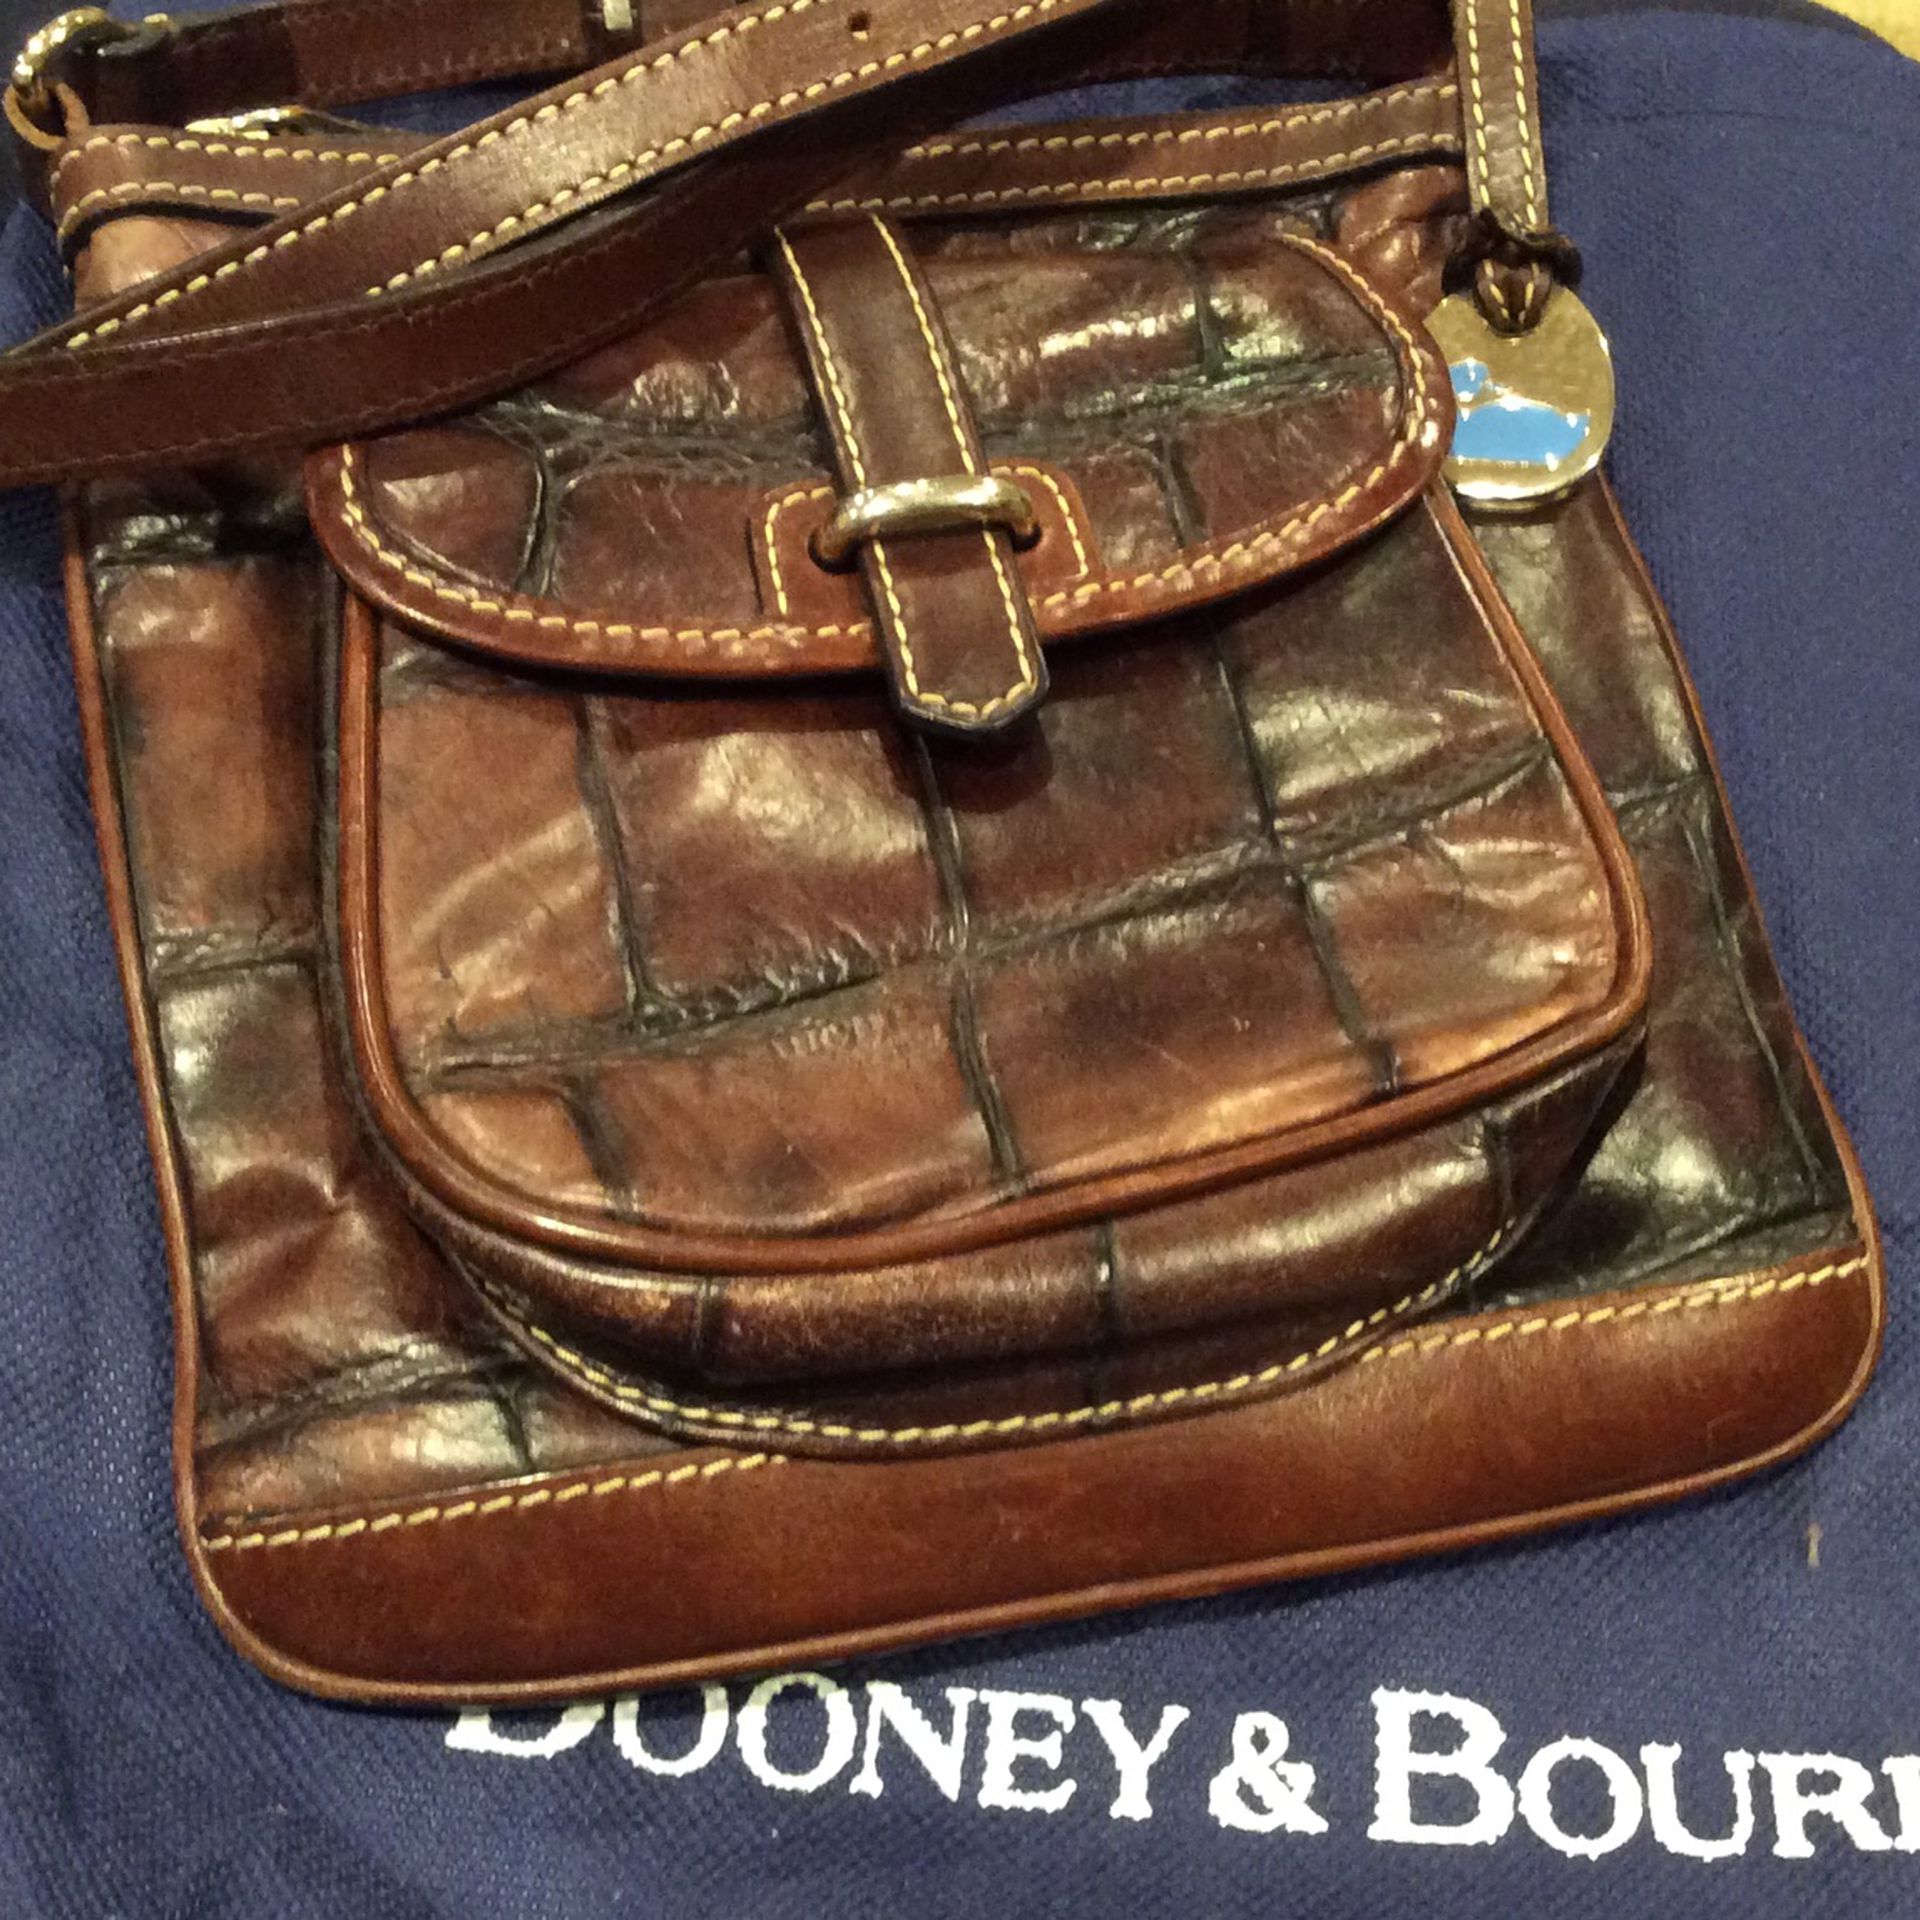 This 2tone Dark Brown/ Light Brown Leather small size H 7”x W 6” Crossbody Dooney and Bourke Purse comes with dust bag.